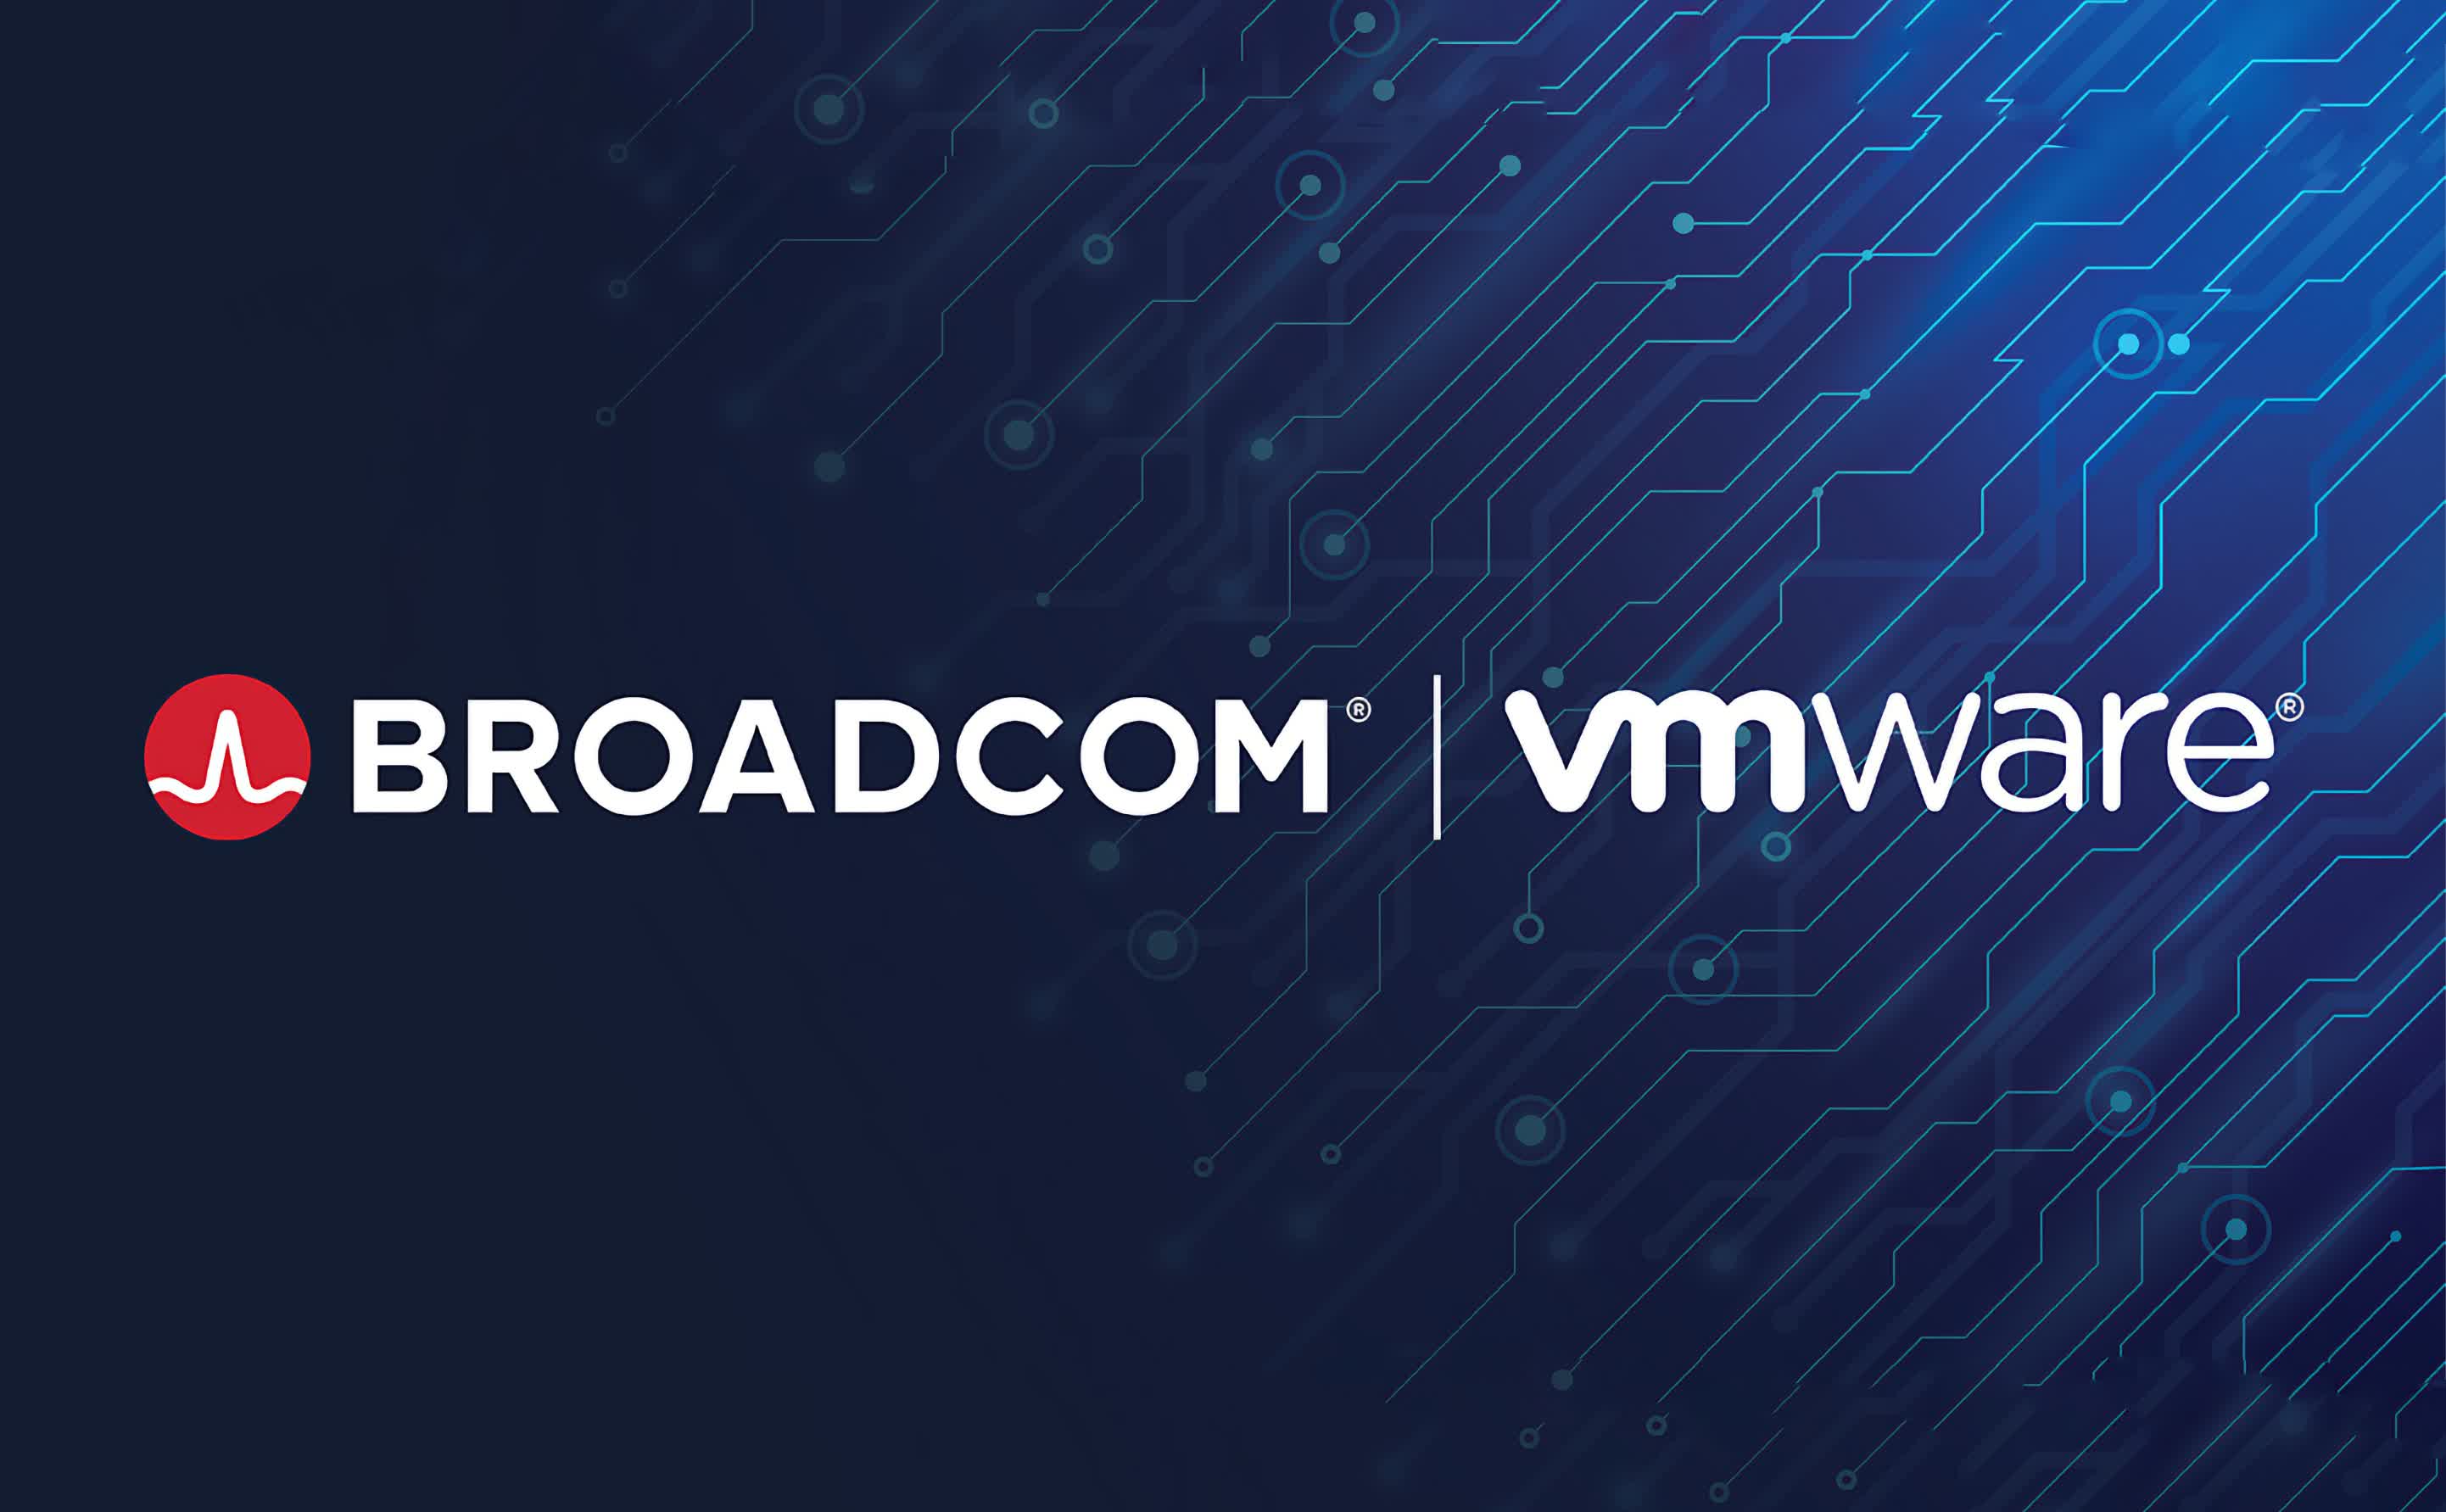 Broadcom plans to acquire VMware for a whopping $61 billion